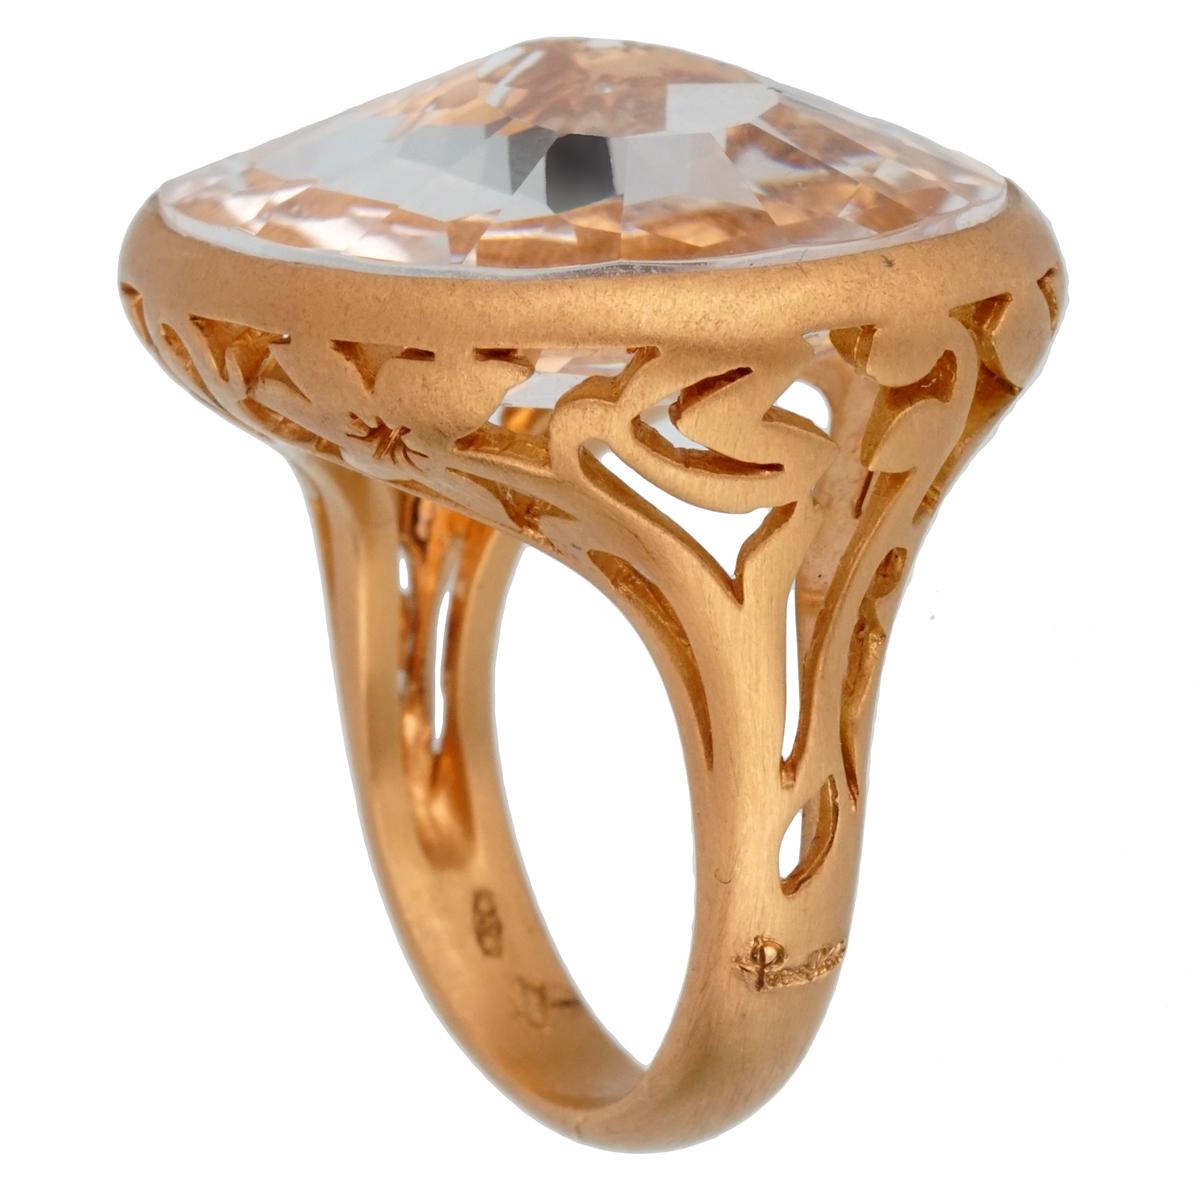 A chic brand new Pomellato cocktail ring showcasing a 10.19ct White Quartz set in 18k rose gold. The ring measures a size 5.75 and can be resized

Pomellato Retail: $4600
Sku: 2449